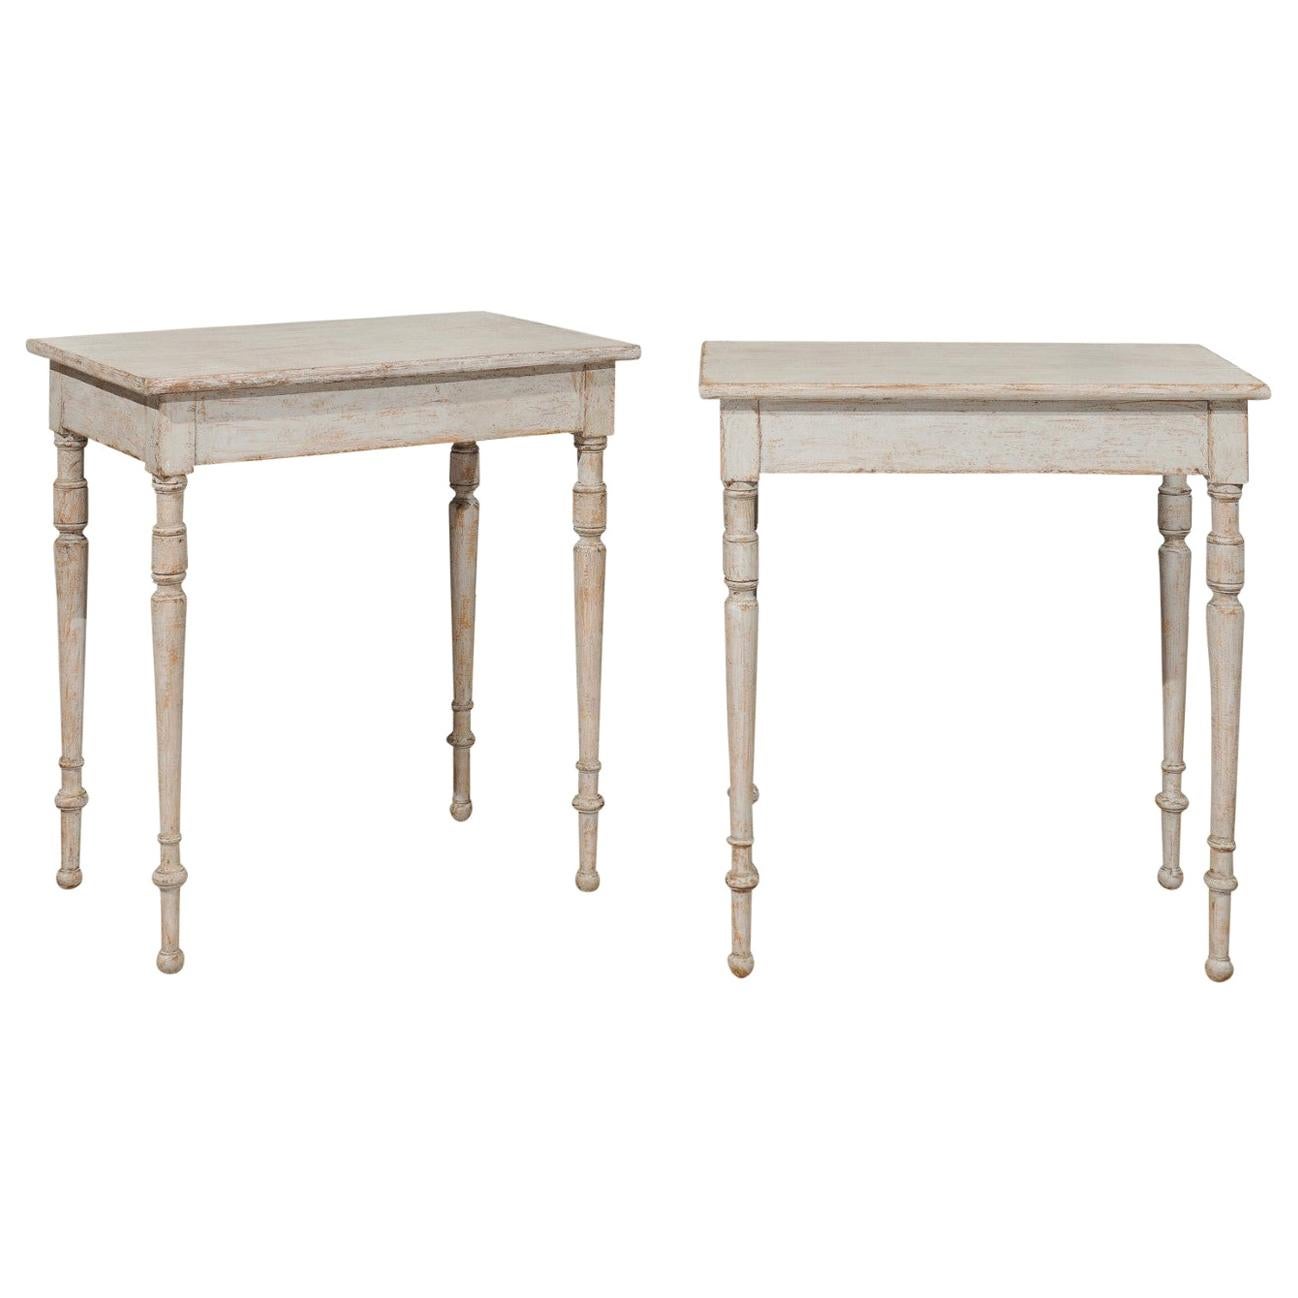 Pair of Swedish 19th Century Tables with Turned Legs and Distressed Finish